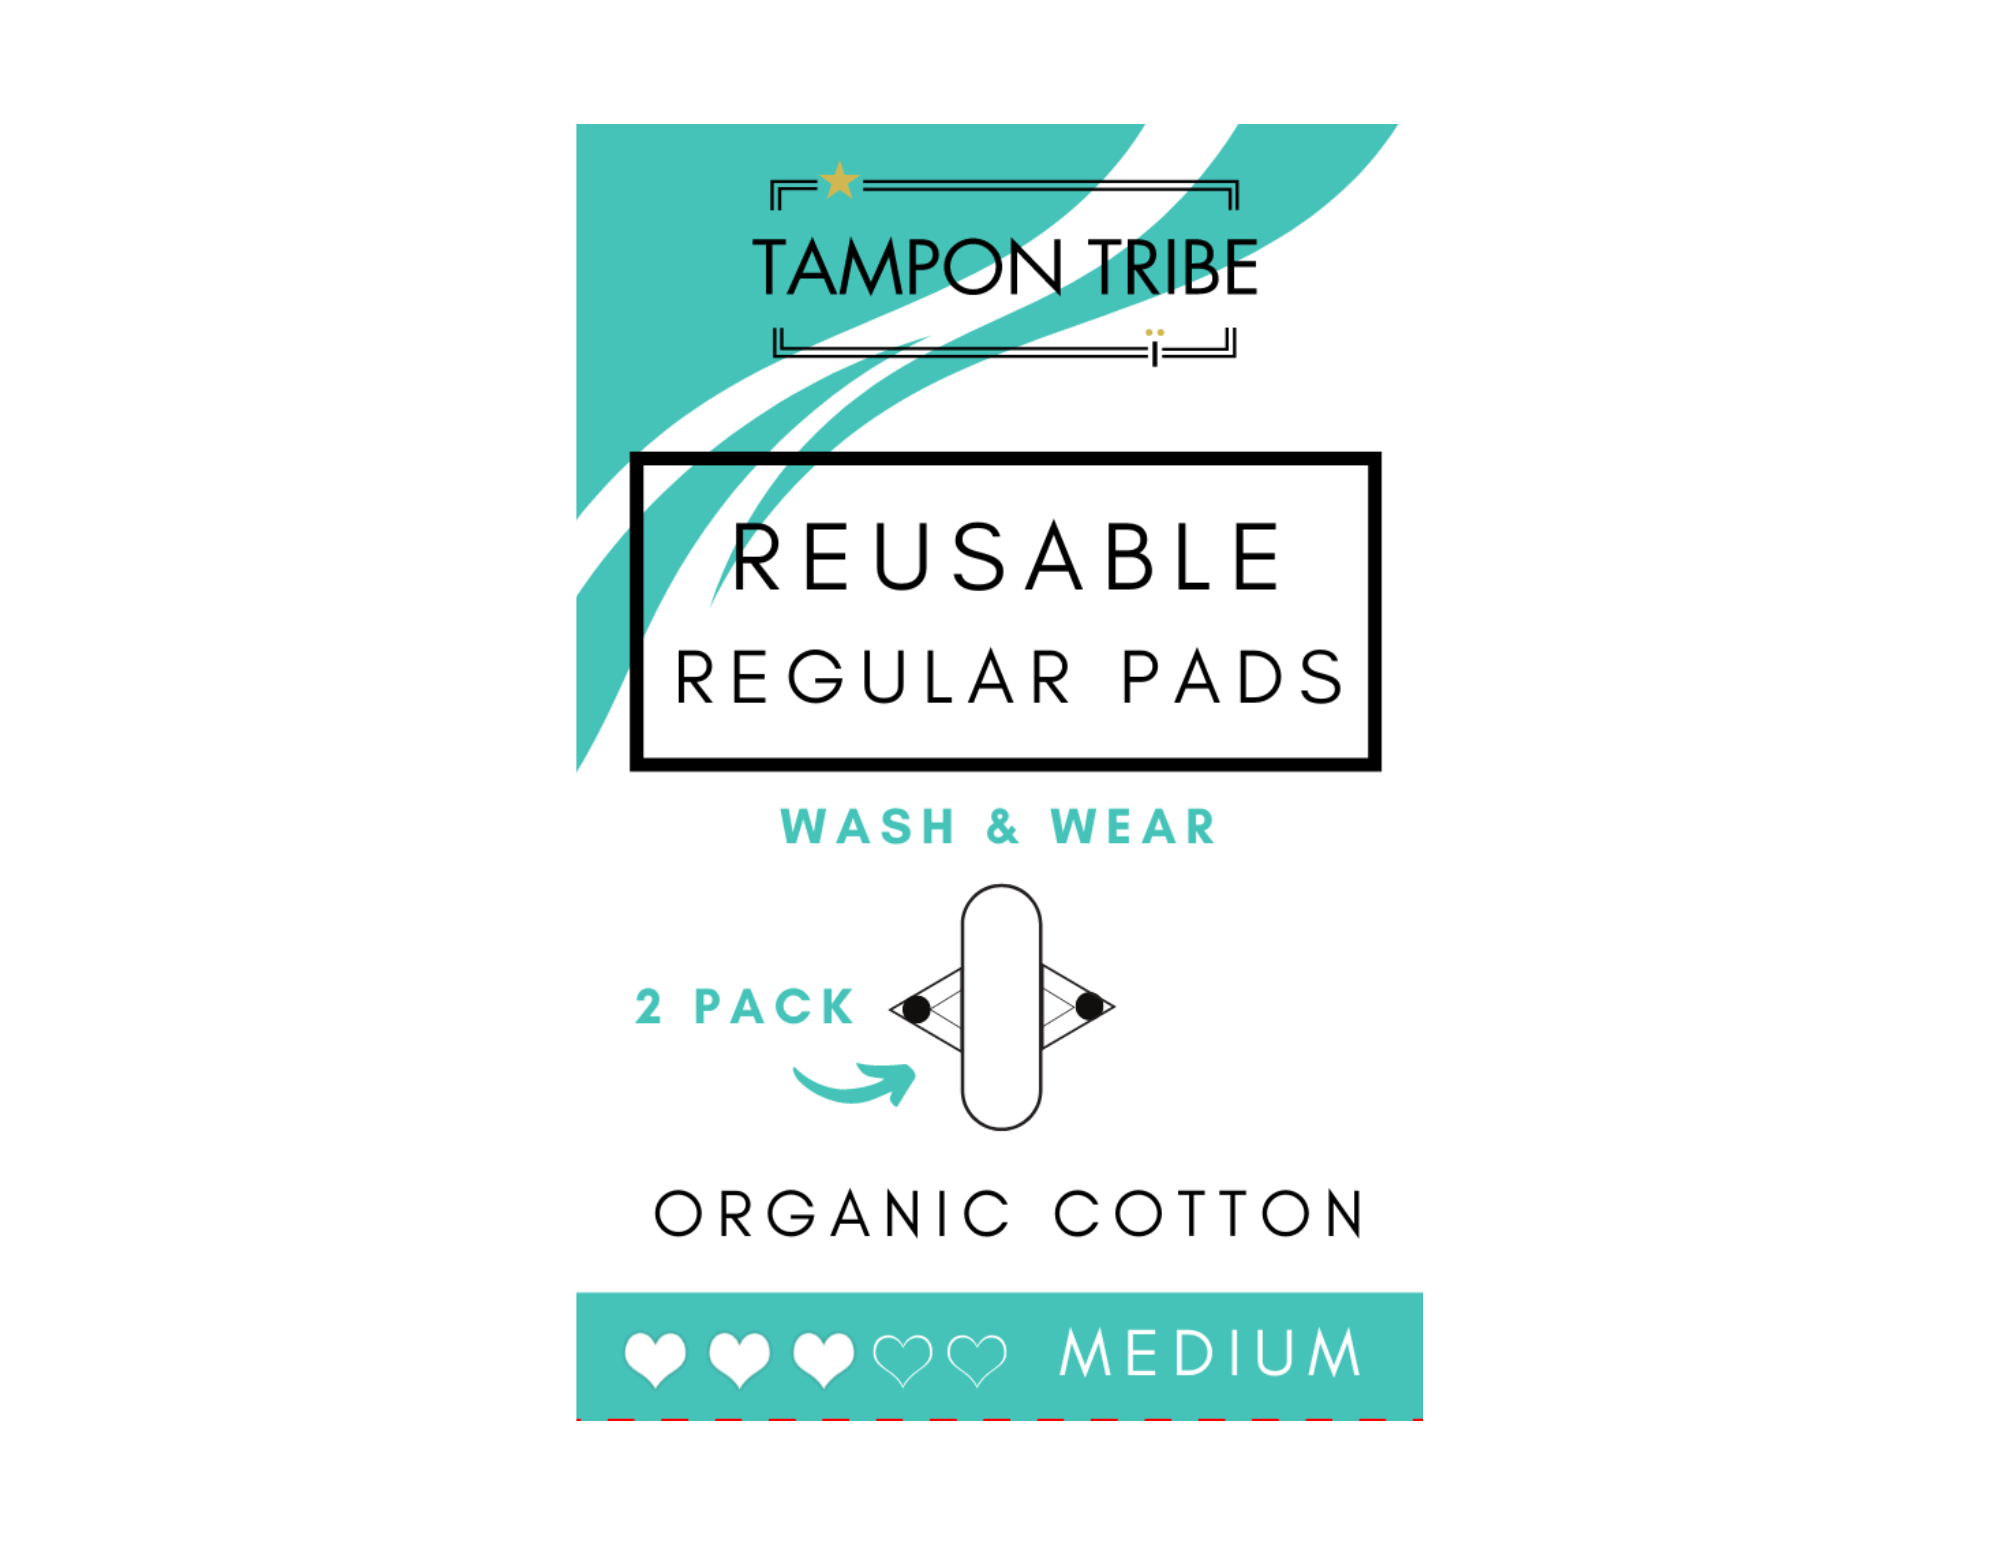 Reusable Menstrual Products  Eco-friendly baby/family products